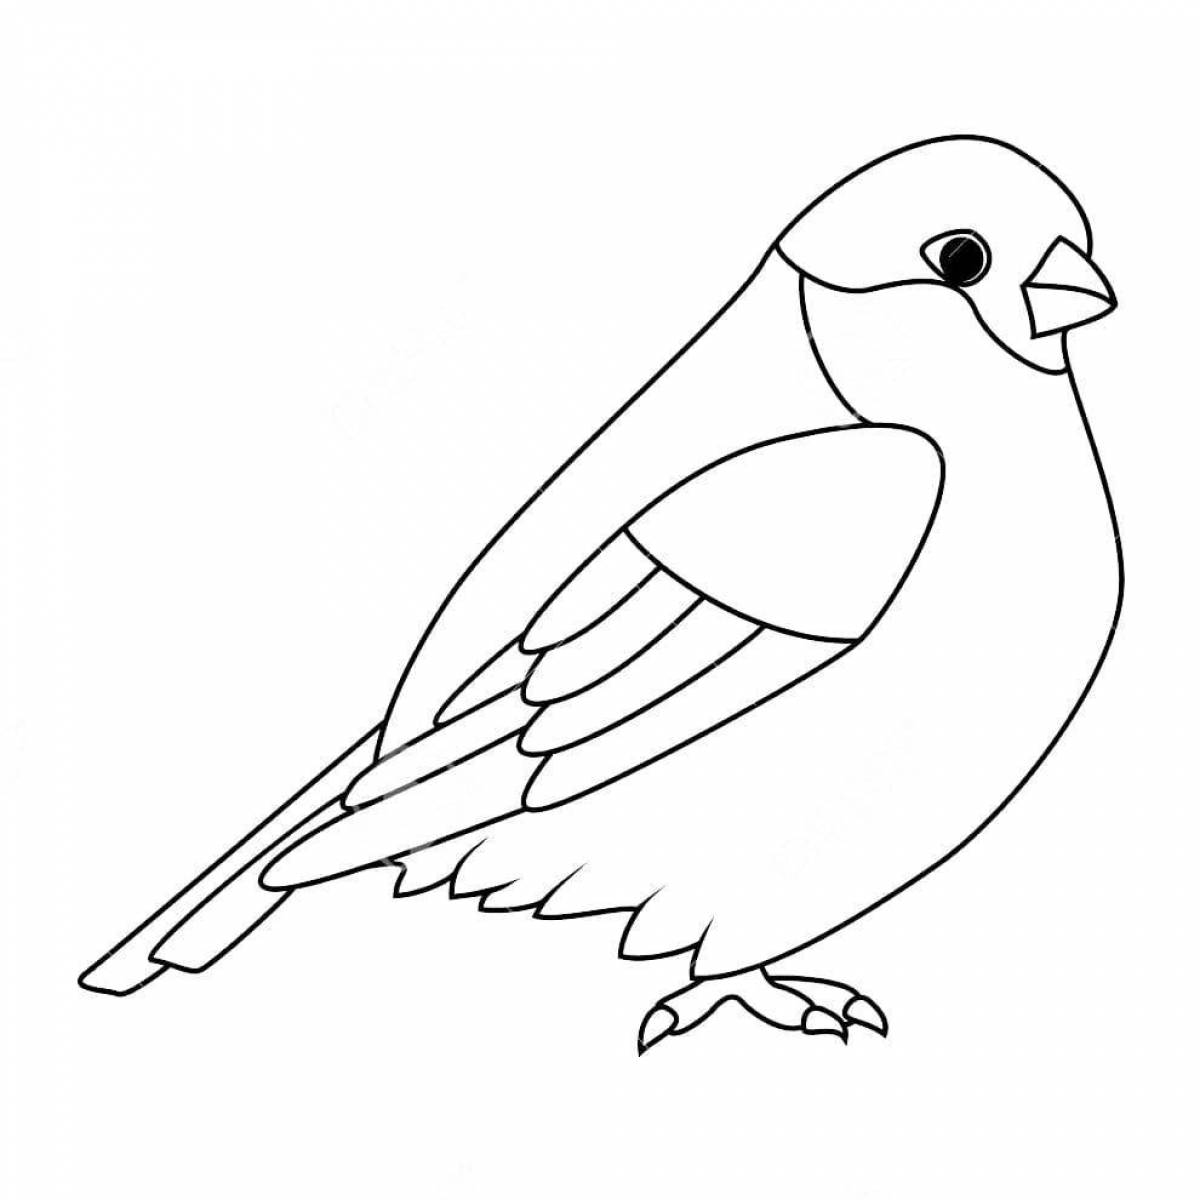 Bright owl coloring page